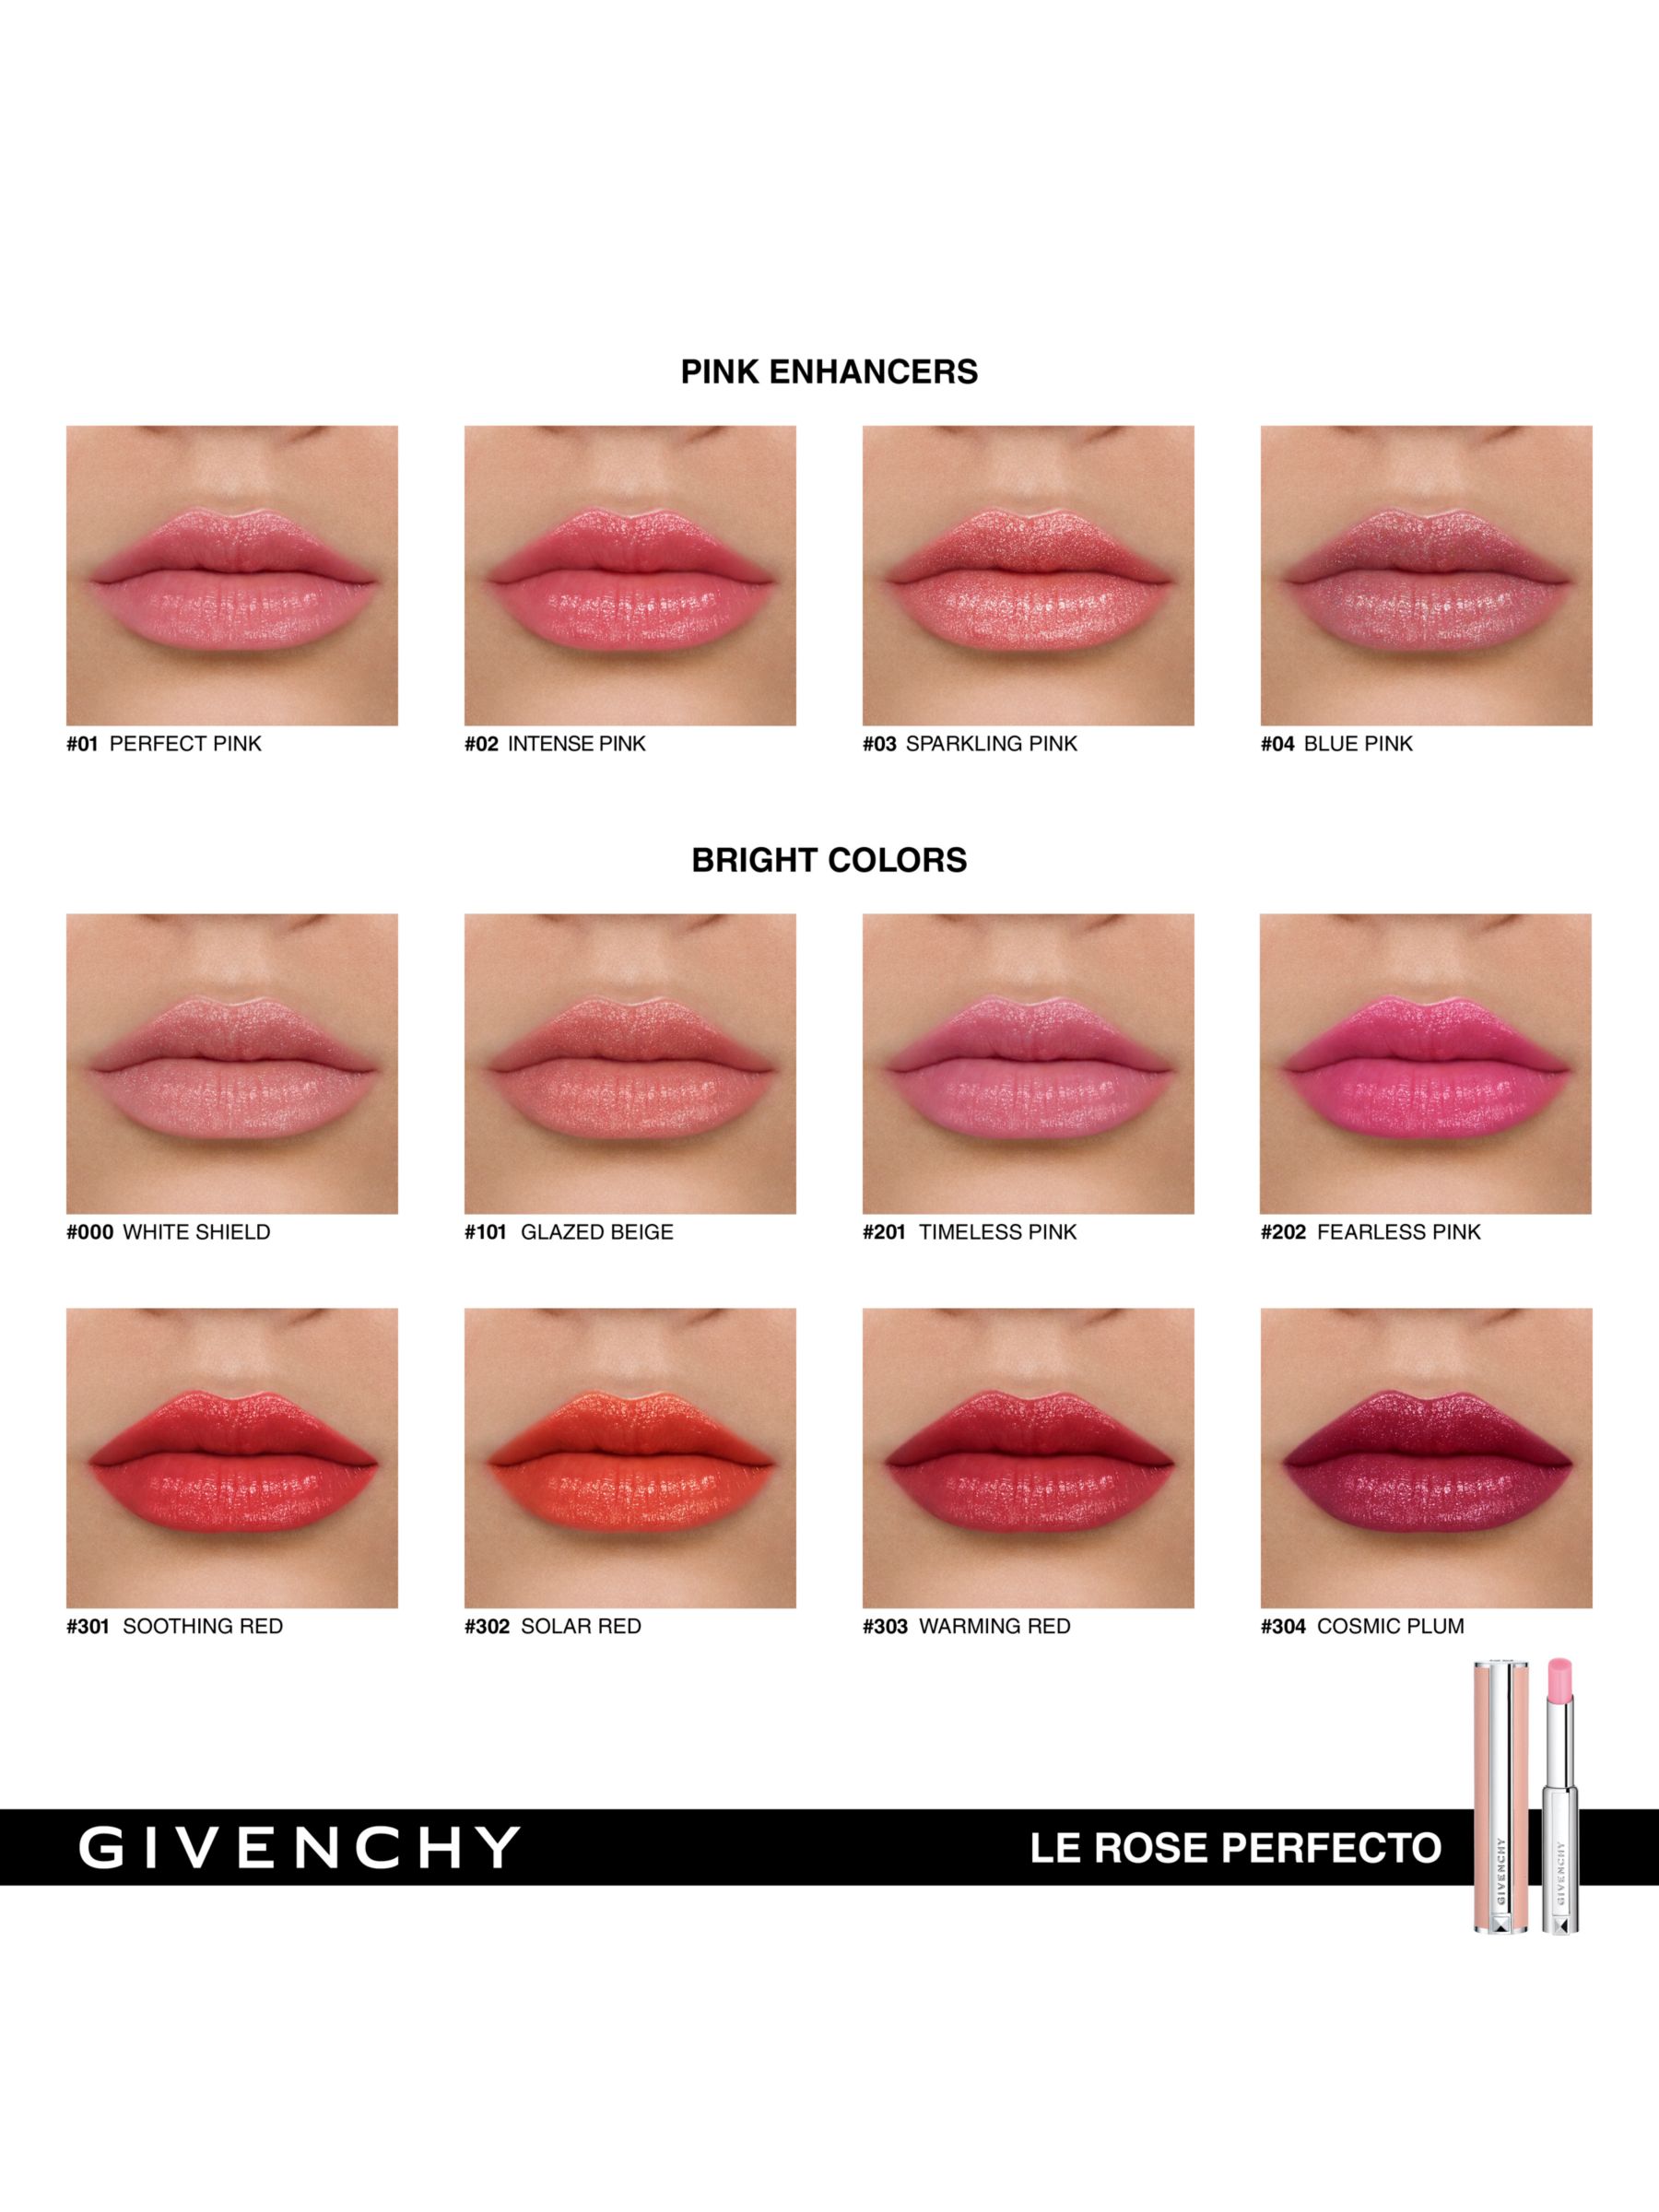 givenchy le rouge perfecto 04